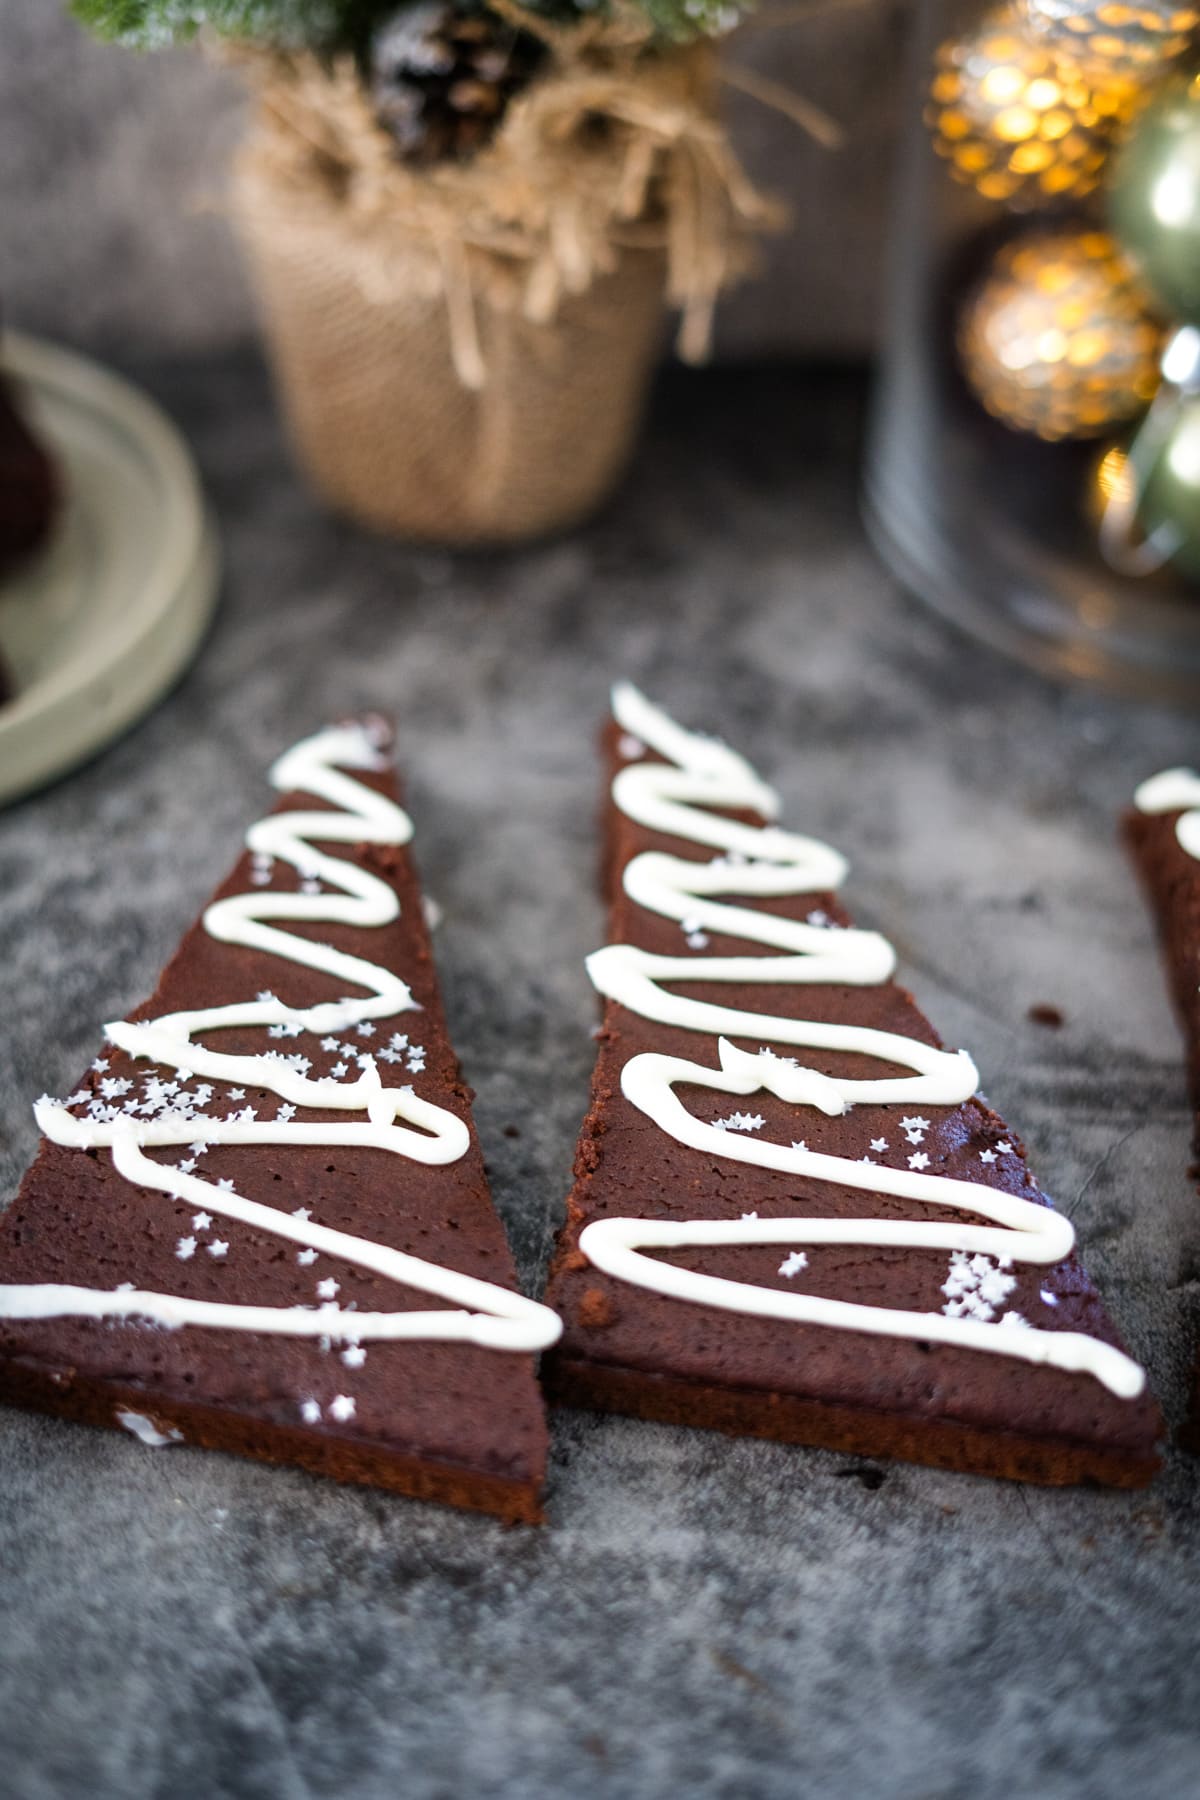 Spiced chocolate Christmas cookies with white icing.